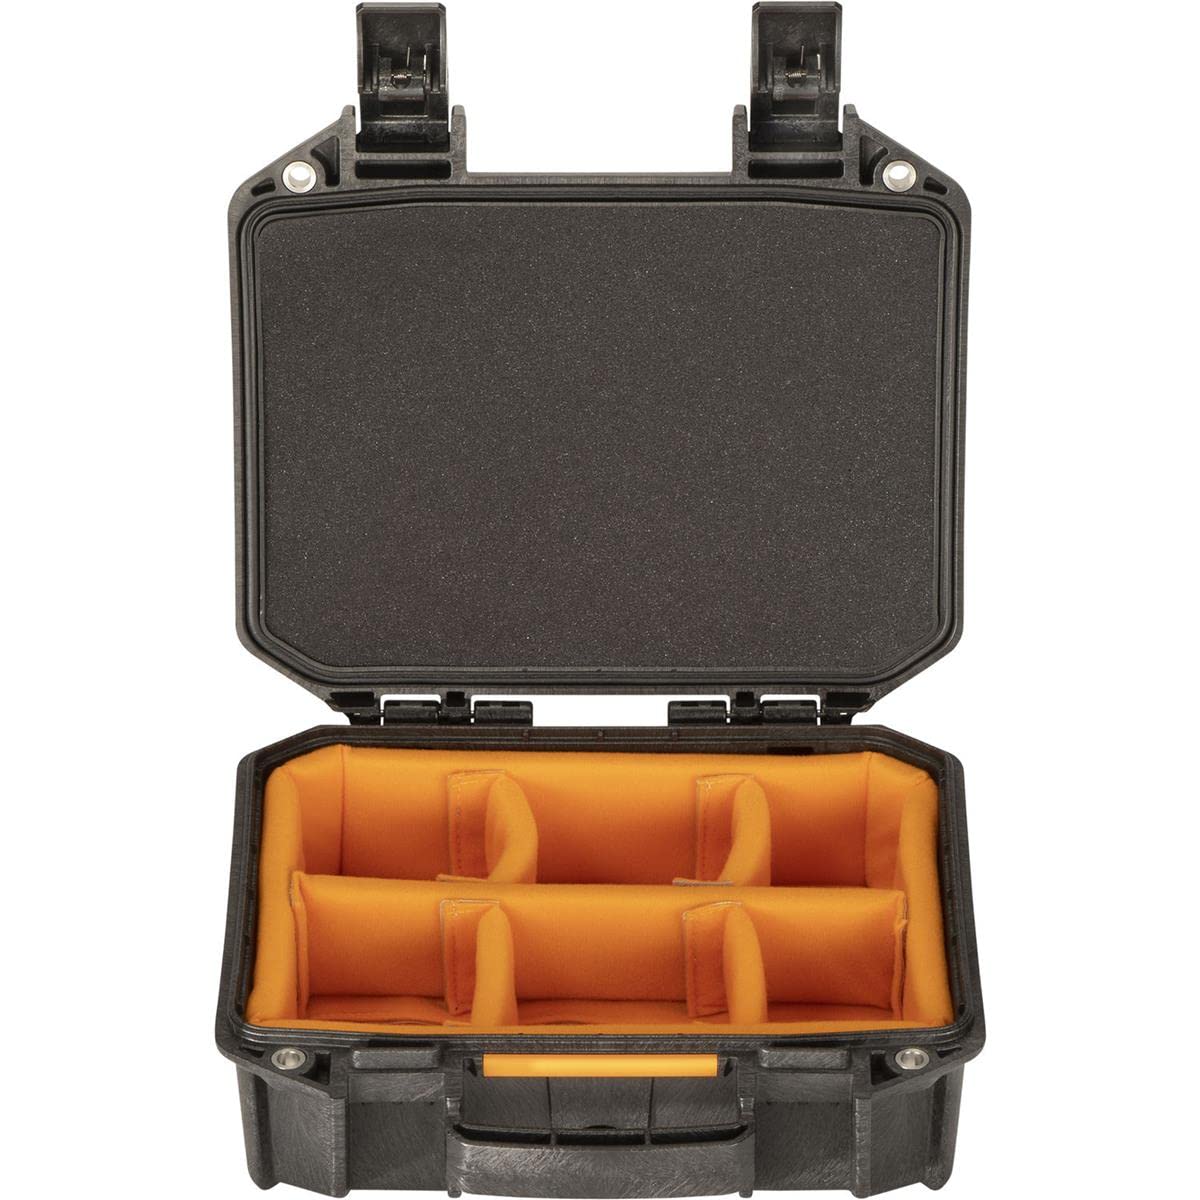 Pelican Vault - V100 Multi-Purpose Hard Case with Padded Dividers for Camera, Drone, Equipment, Electronics, and Gear (Black)